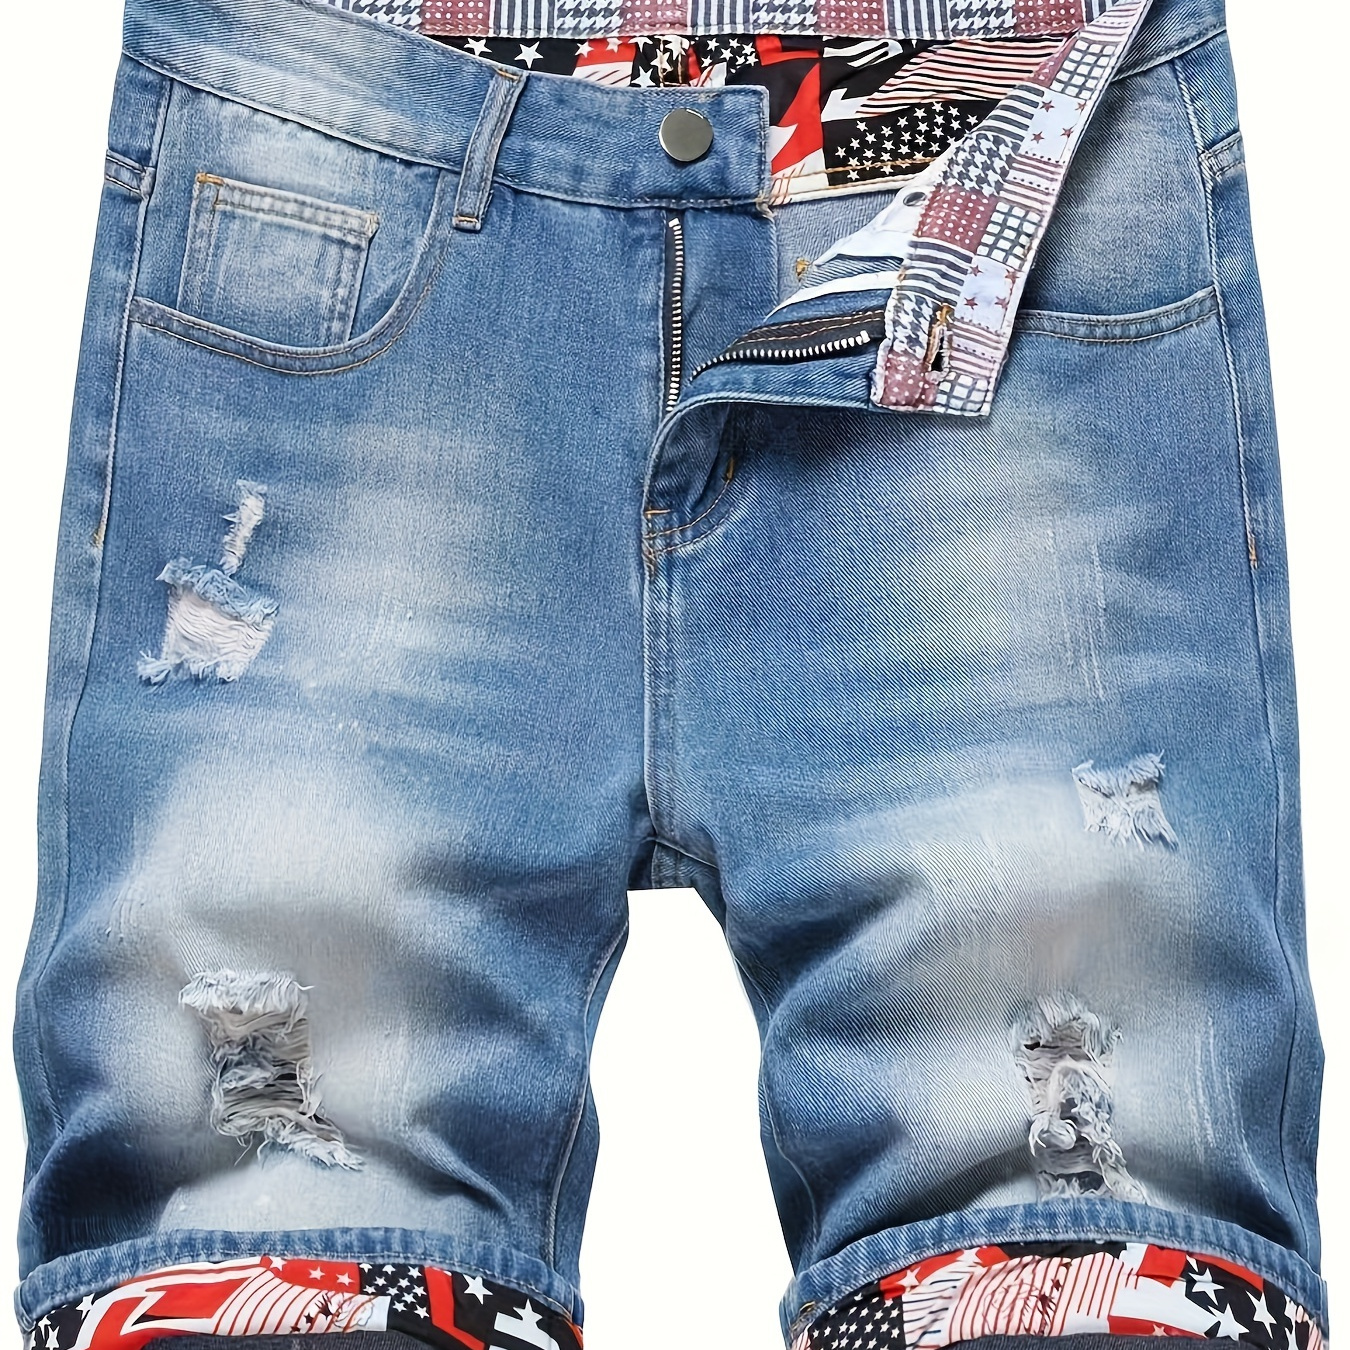 

Men's Geometric Graphic Print Ripped Denim Shorts With Pockets, Casual Cotton Blend Jorts For Summer Outdoor Activities